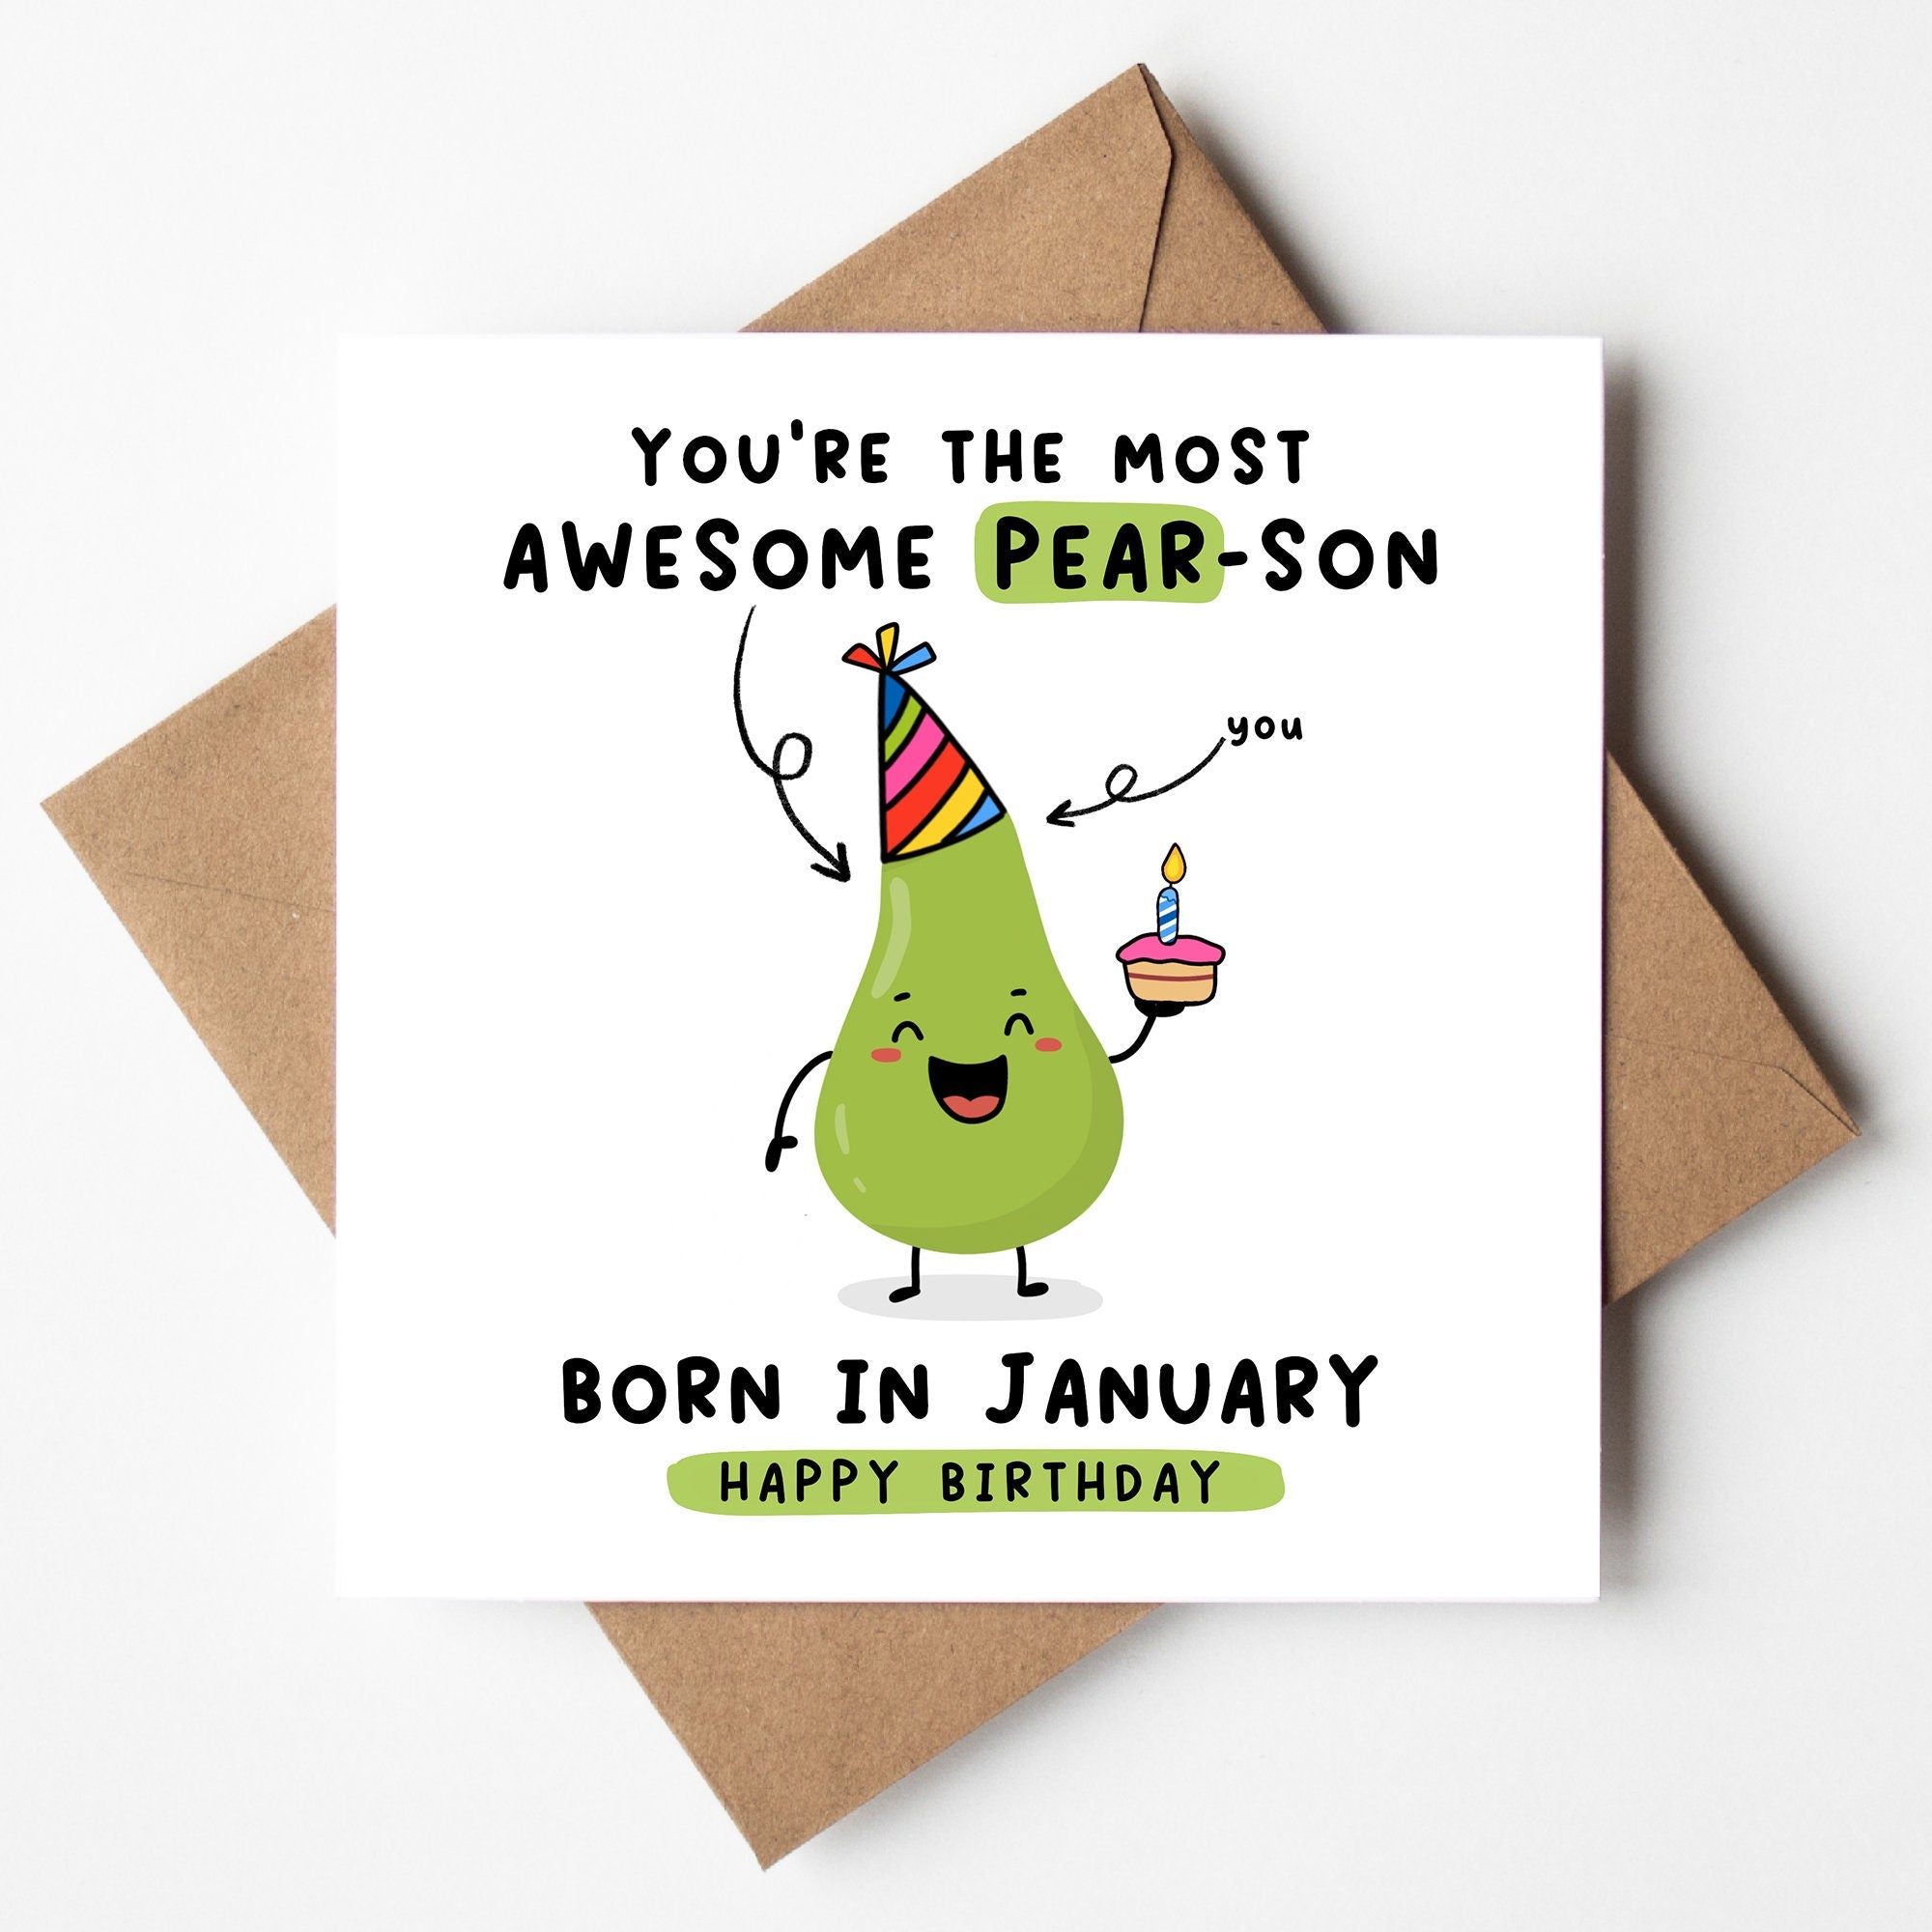 You're The Most Awesome Pear-son born in January, Funny Pun Card, Pear Pun Card, Born In January, Birth Month Card January